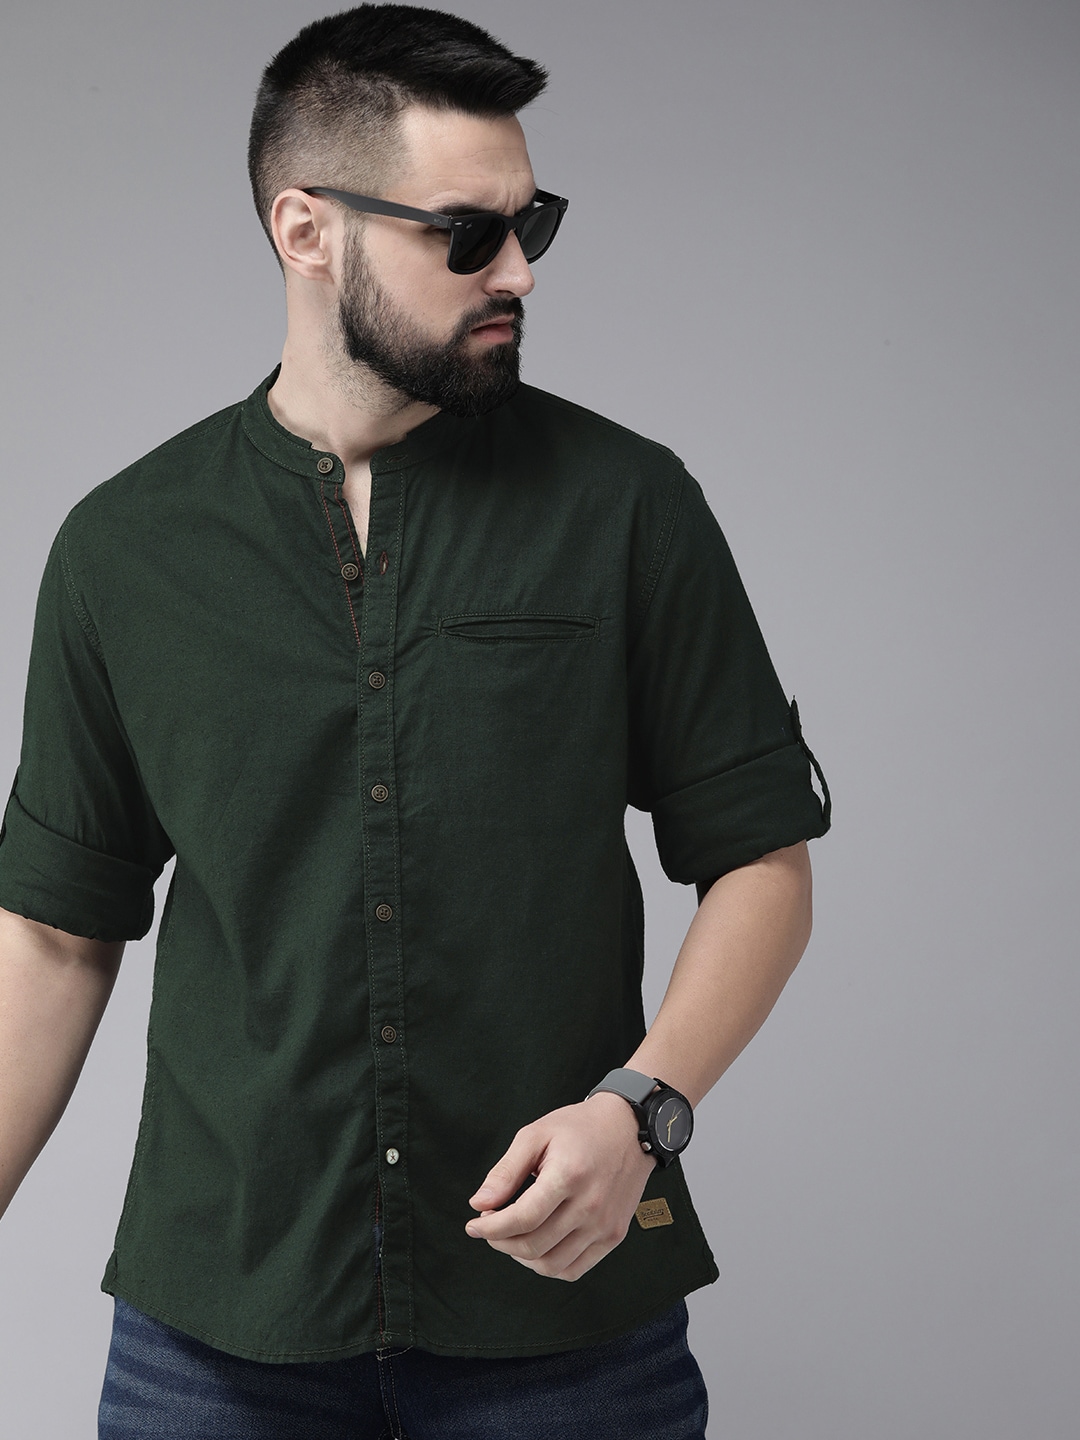 The Roadster Life Co. Linen-Cotton Casual Shirt